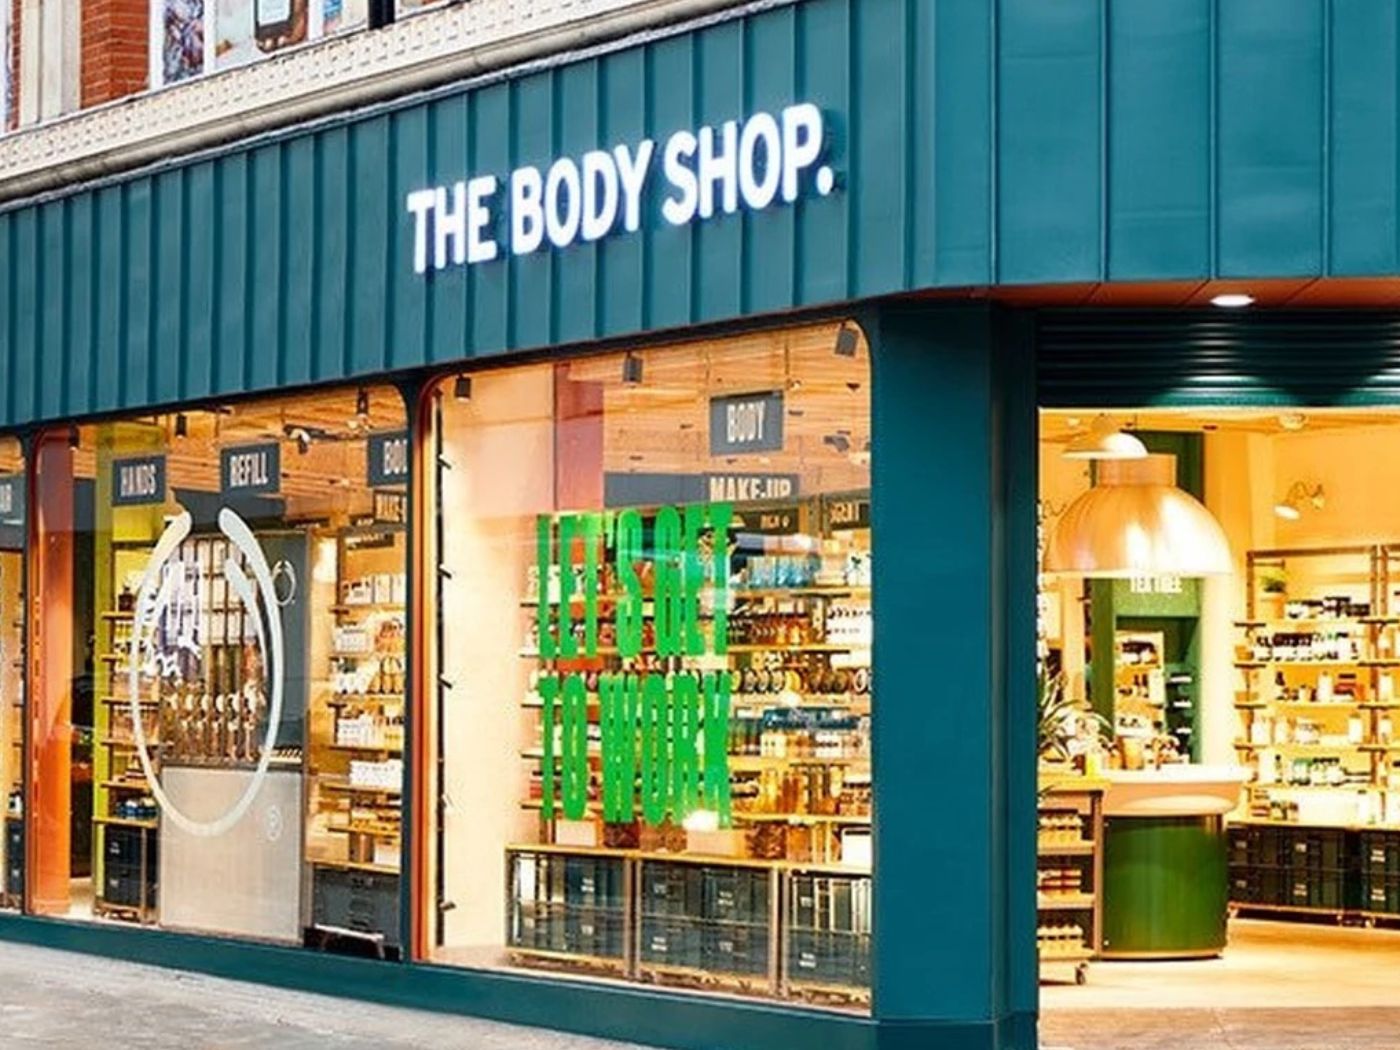 Exterior of a branch of The Body Shop on a British high street.